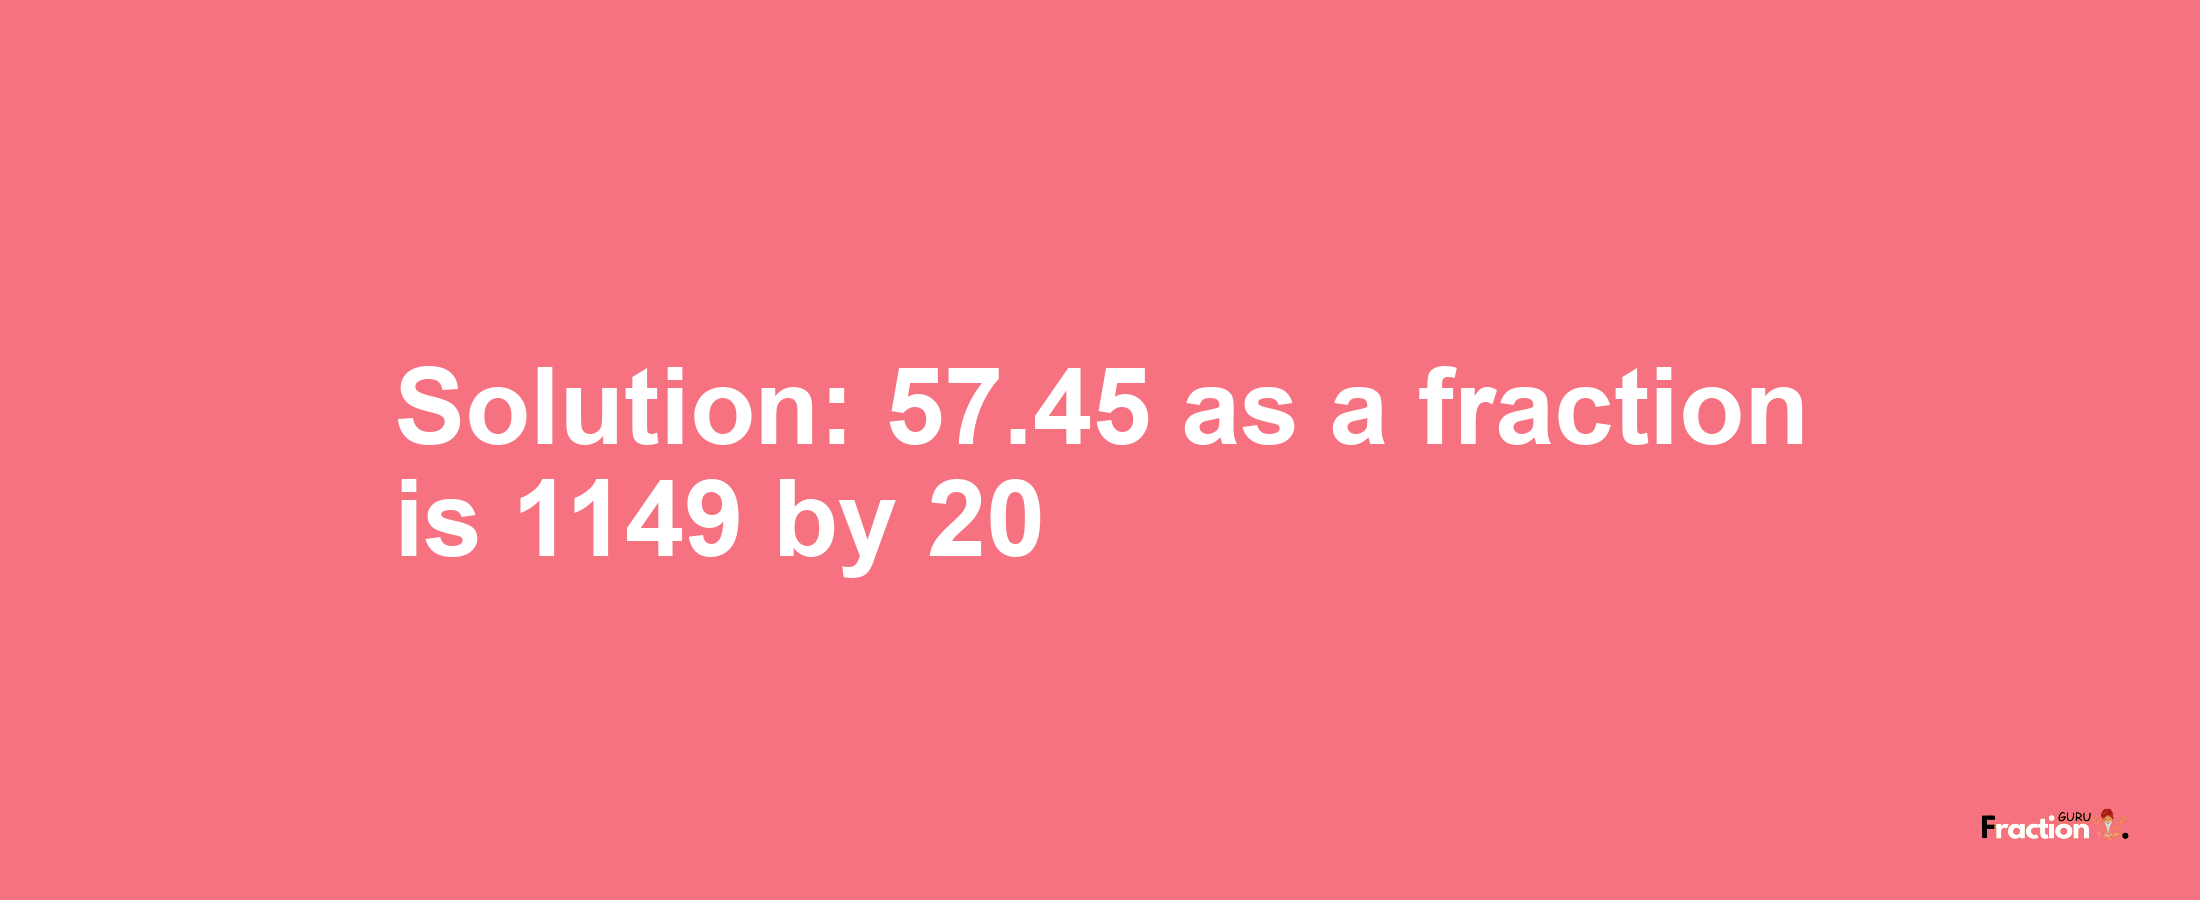 Solution:57.45 as a fraction is 1149/20